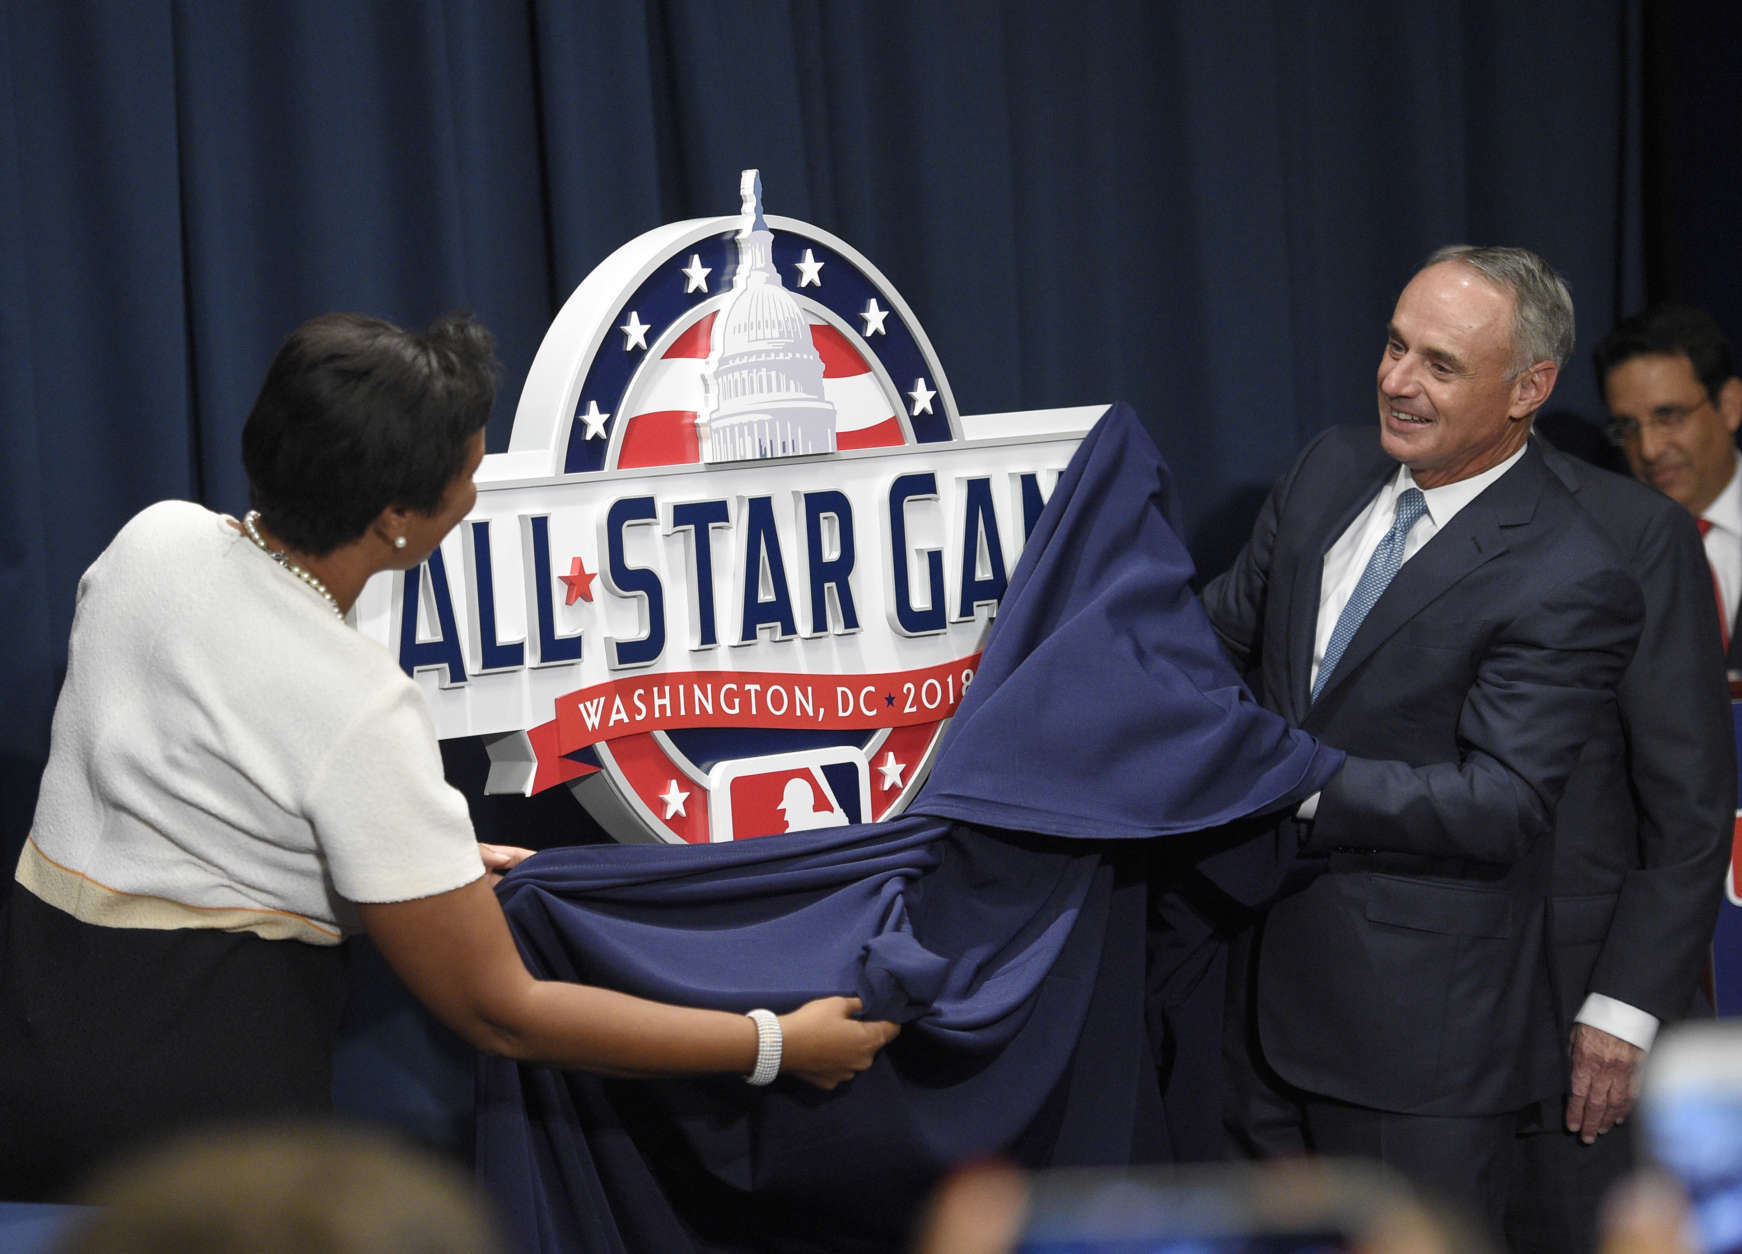 Muriel Bowser, Mayor of the District of Columbia, left, and Rob Manfred, Commissioner of Baseball, right, unveil the 2018 MLB All-Star Game logo at a baseball news conference to unveil the logo, Wednesday, July 26, 2017, in Washington. (AP Photo/Nick Wass)